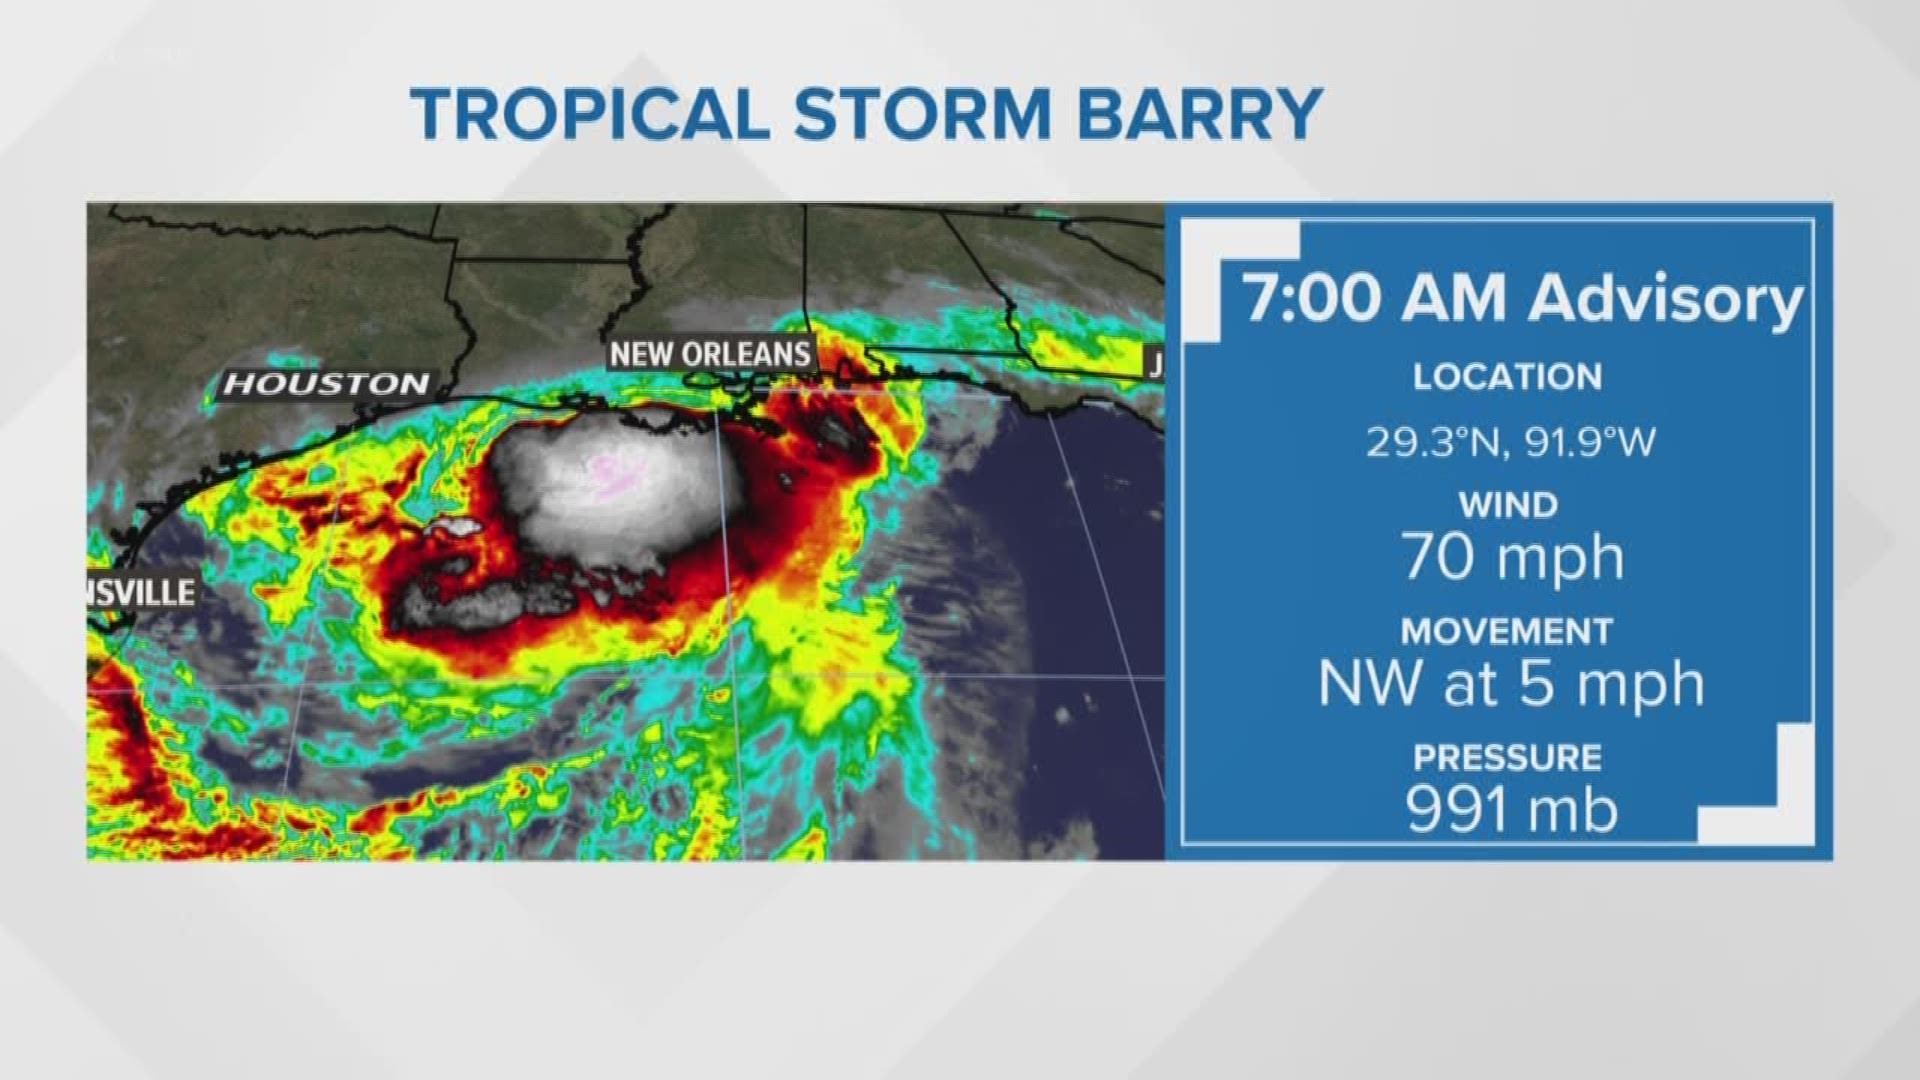 We're tracking Tropical Storm Barry all morning as it is expected to make landfall.